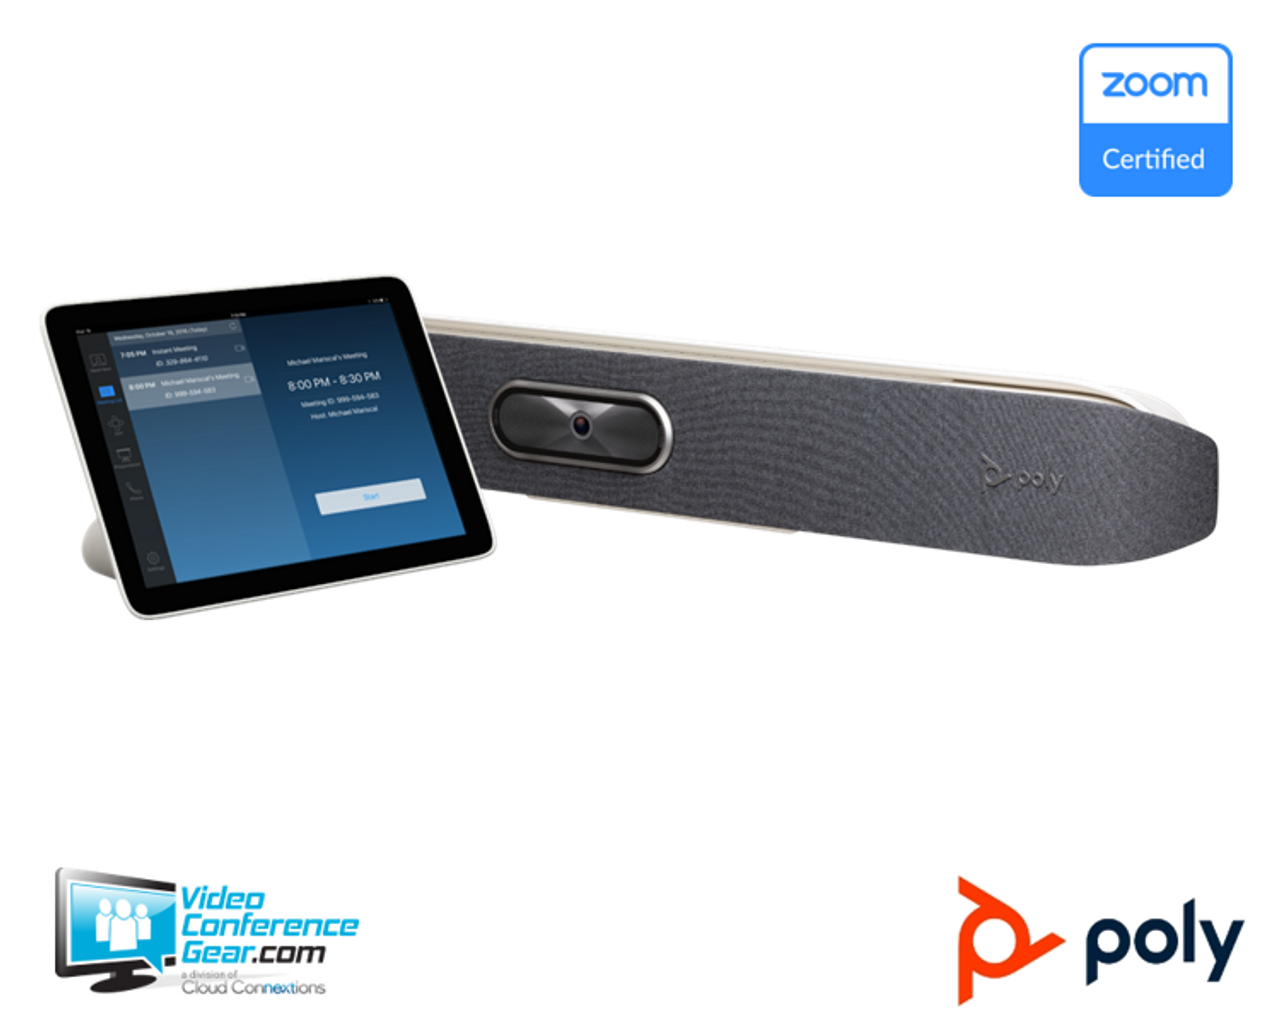 Poly Studio X50 Video Soundbar Bundled with the Poly TC8 Preloaded with the Zoom Rooms Video Conferencing Platform